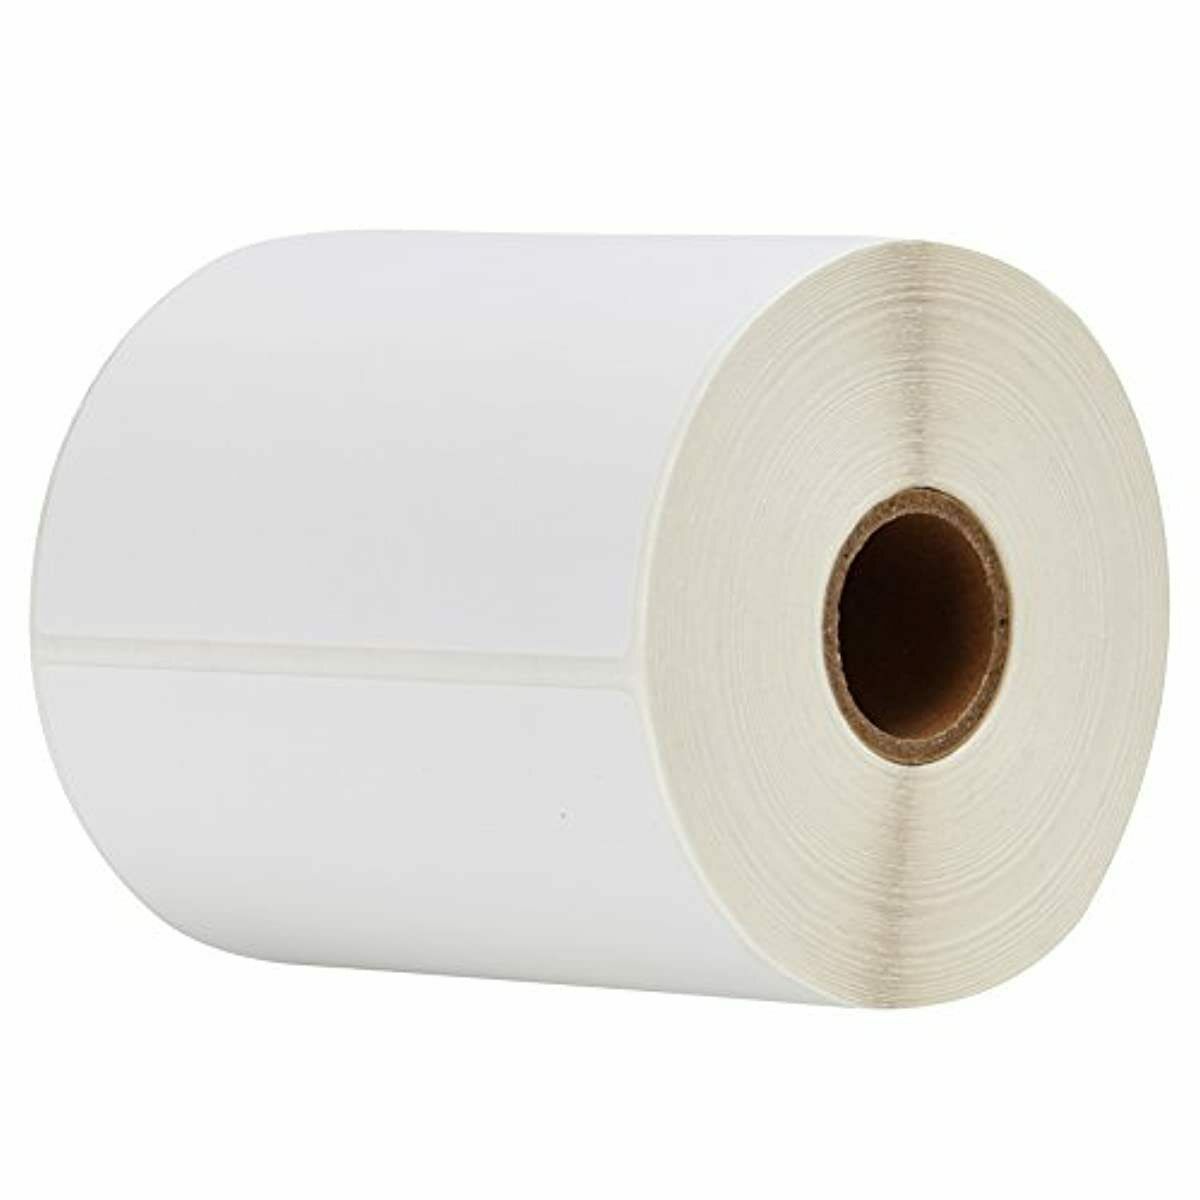 Mflabel 20 Rolls Of 250 4x6 Direct Thermal Blank Shipping Labels For Zebra 2844 Blank Labels 6337